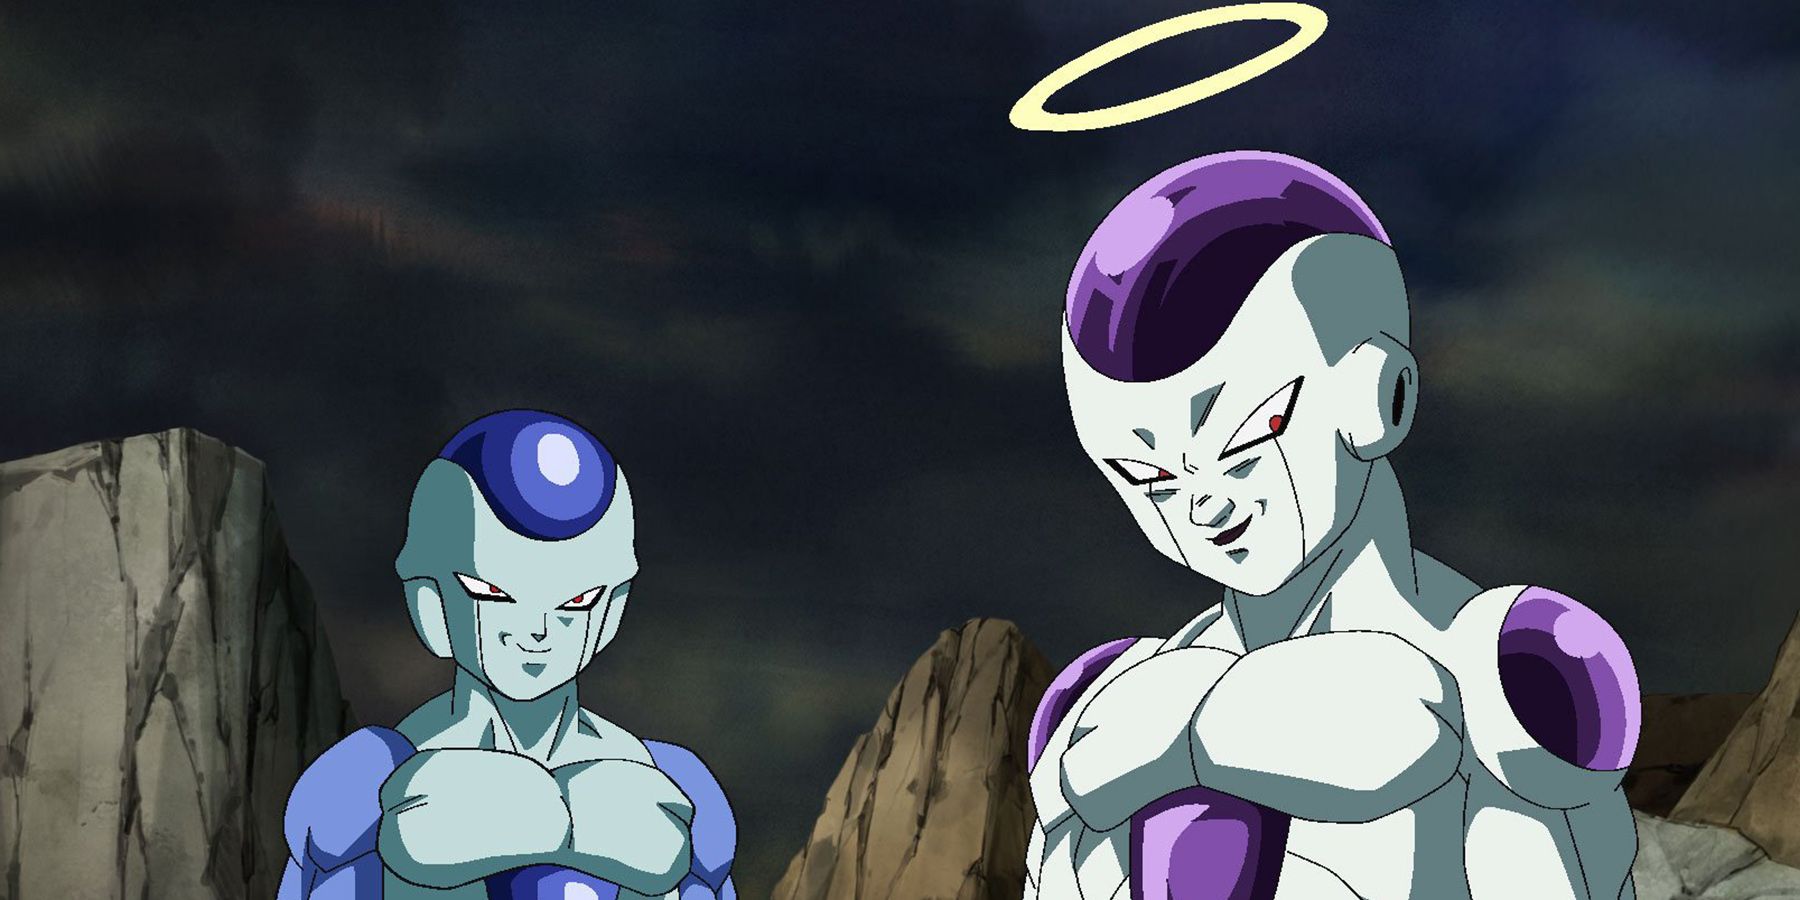 Anime Frieza Frost Tournament of Power